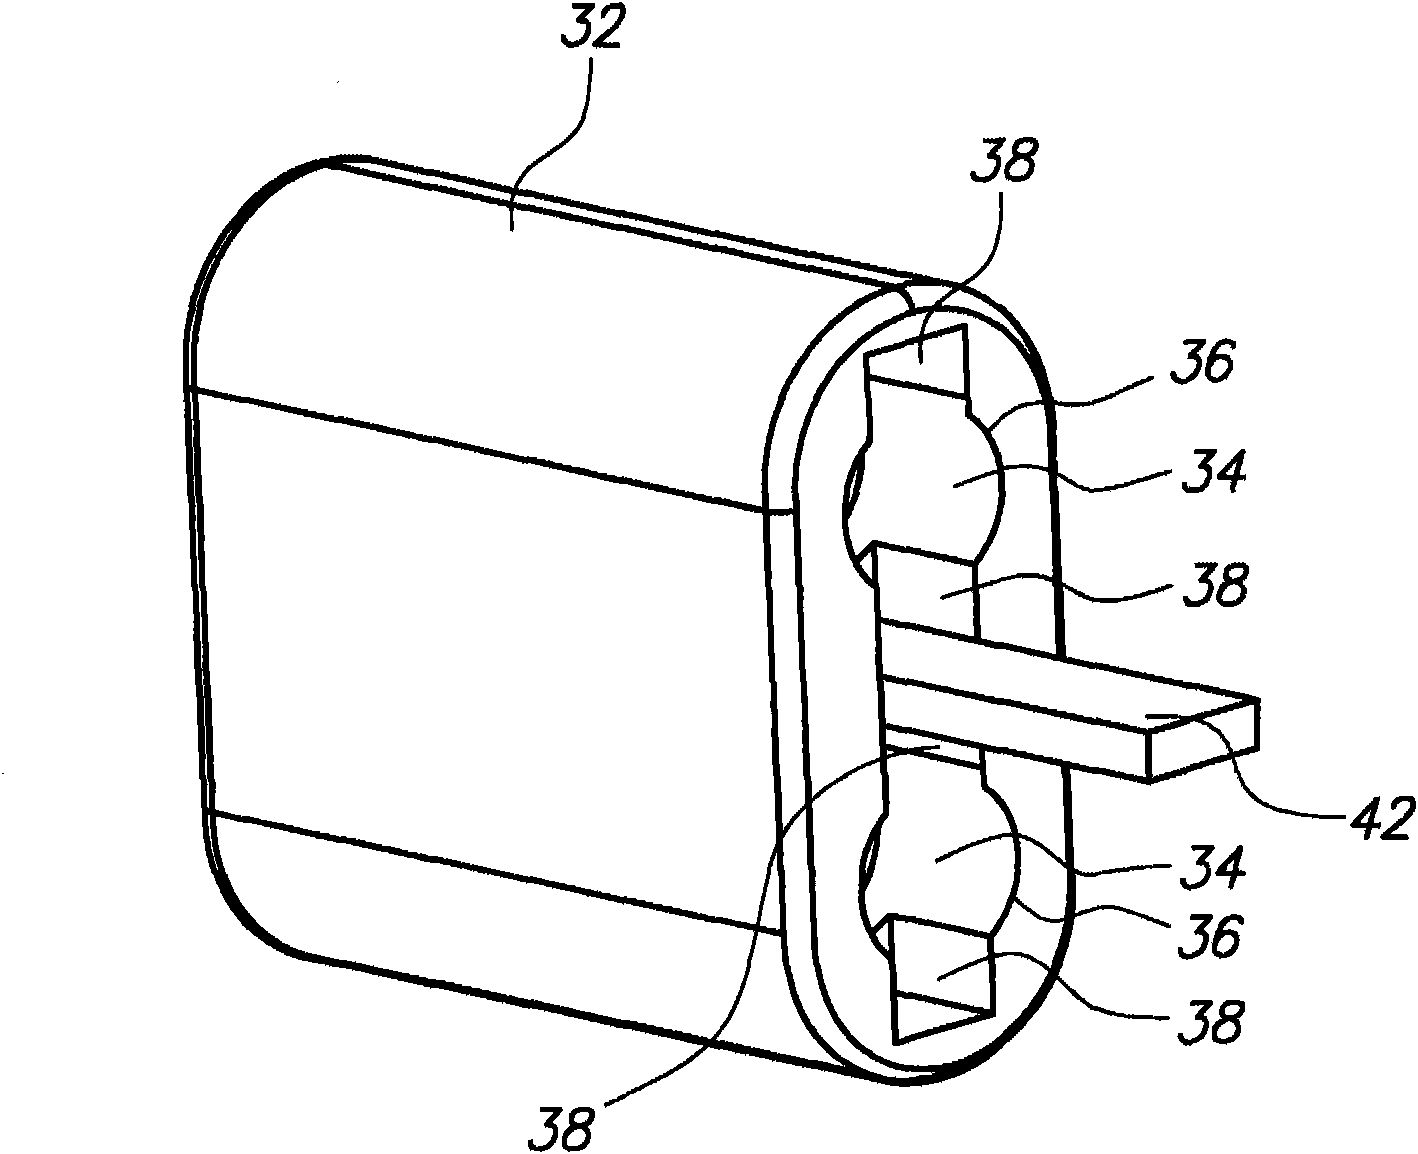 Bipolar ablation probe having porous electrodes for delivering electrically conductive fluid